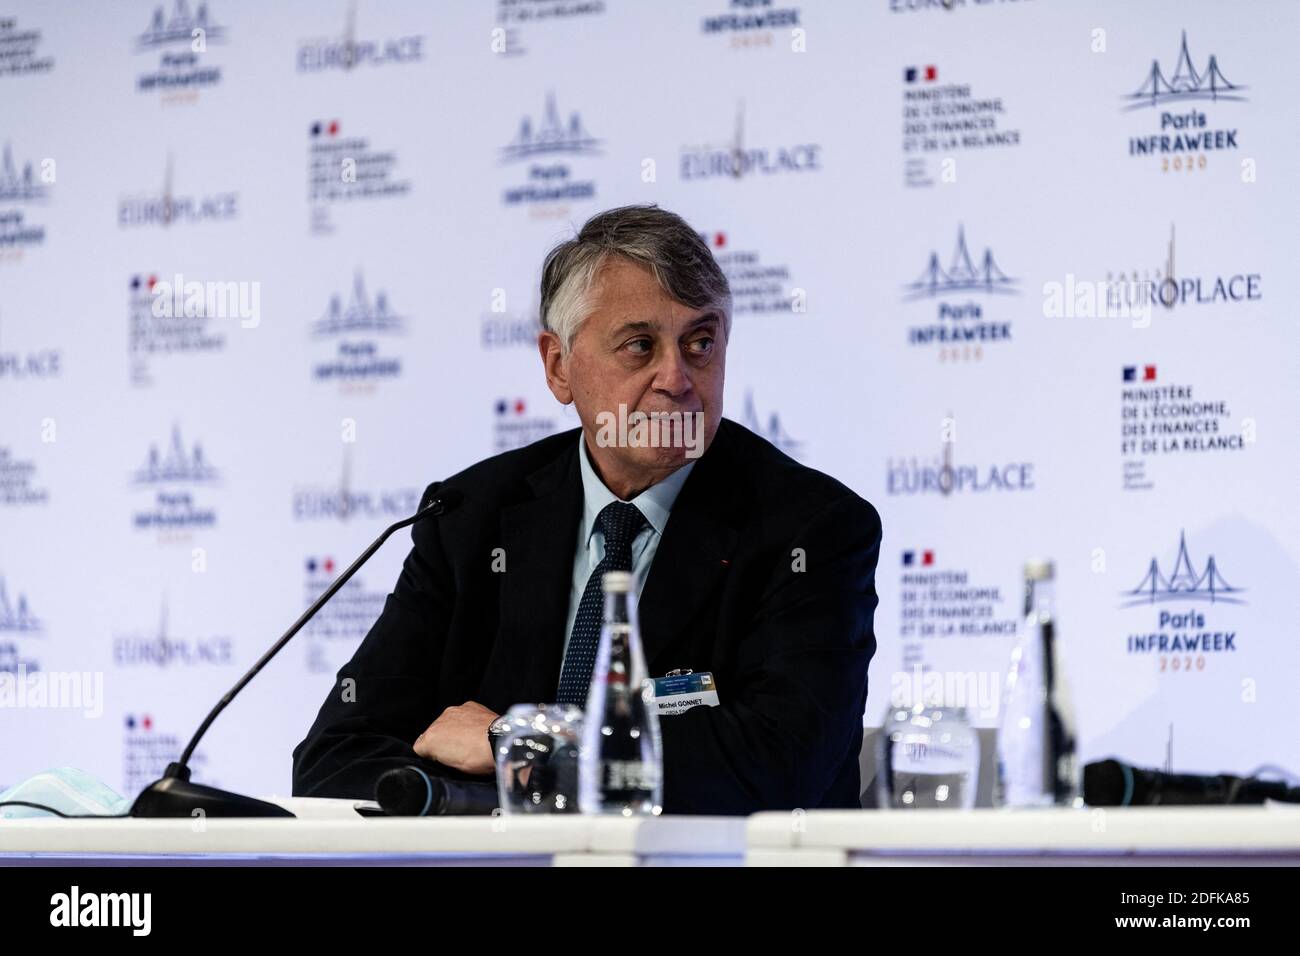 Michel Gonnet, Partner at GB2A Finance, during the inaugural day of the Paris Infraweek 2020 held at the ministry of economy, finances and reflation at Bercy. Paris, France, October 5, 2020. Photo by Daniel Derajinksi/ABACAPRESS.COM Stock Photo